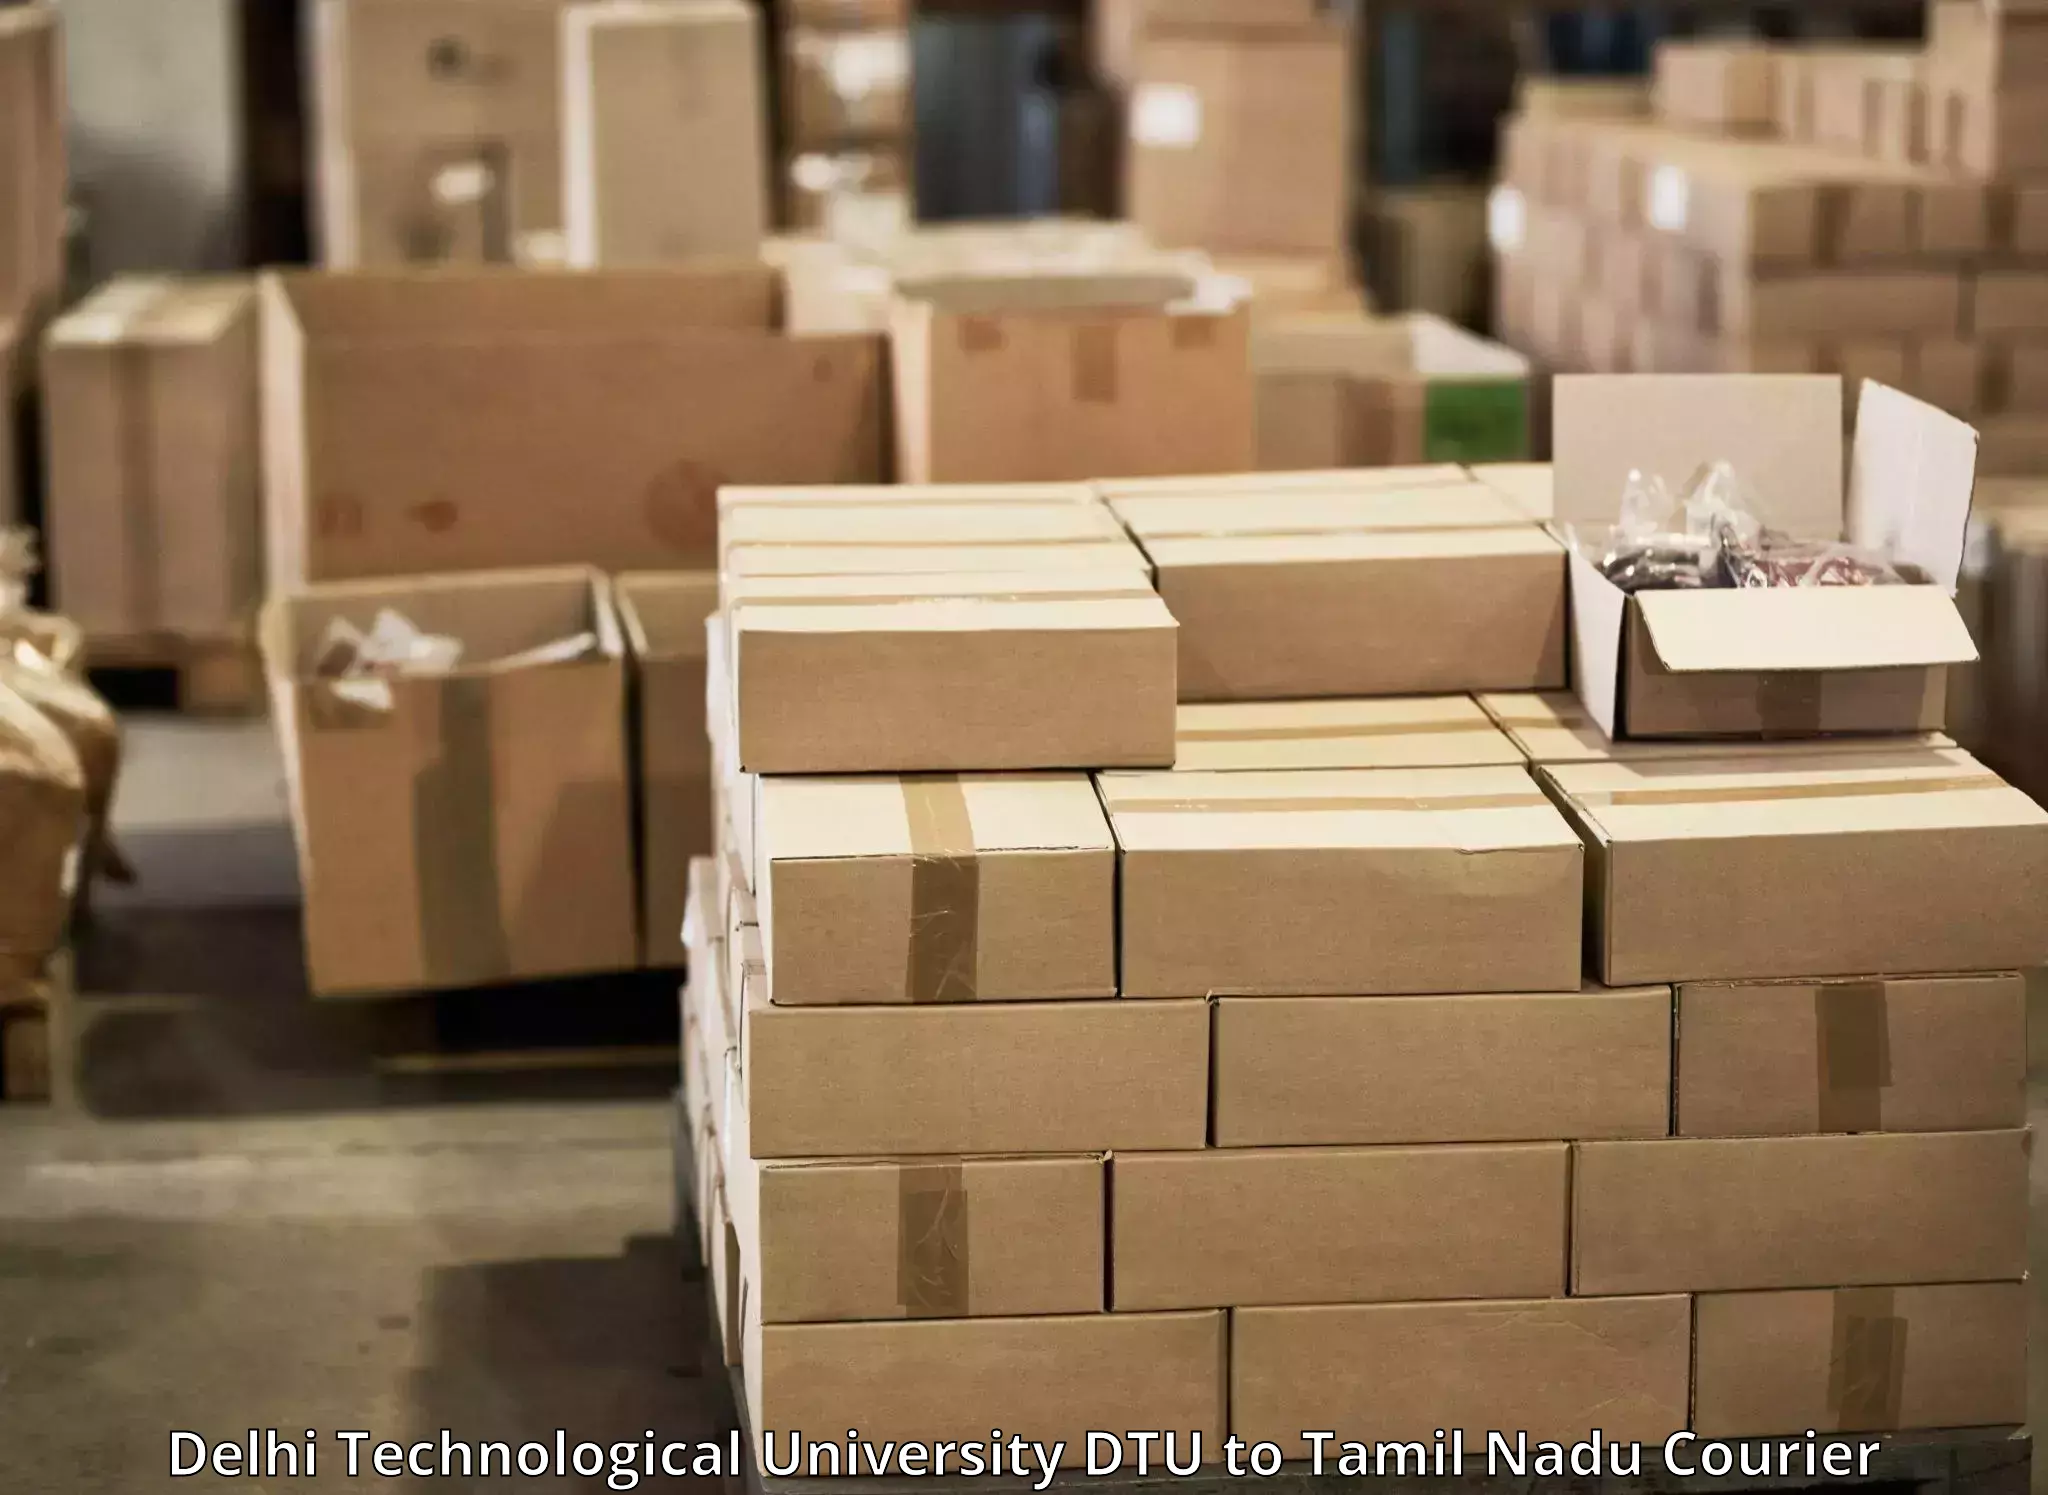 Reliable freight solutions Delhi Technological University DTU to Tindivanam